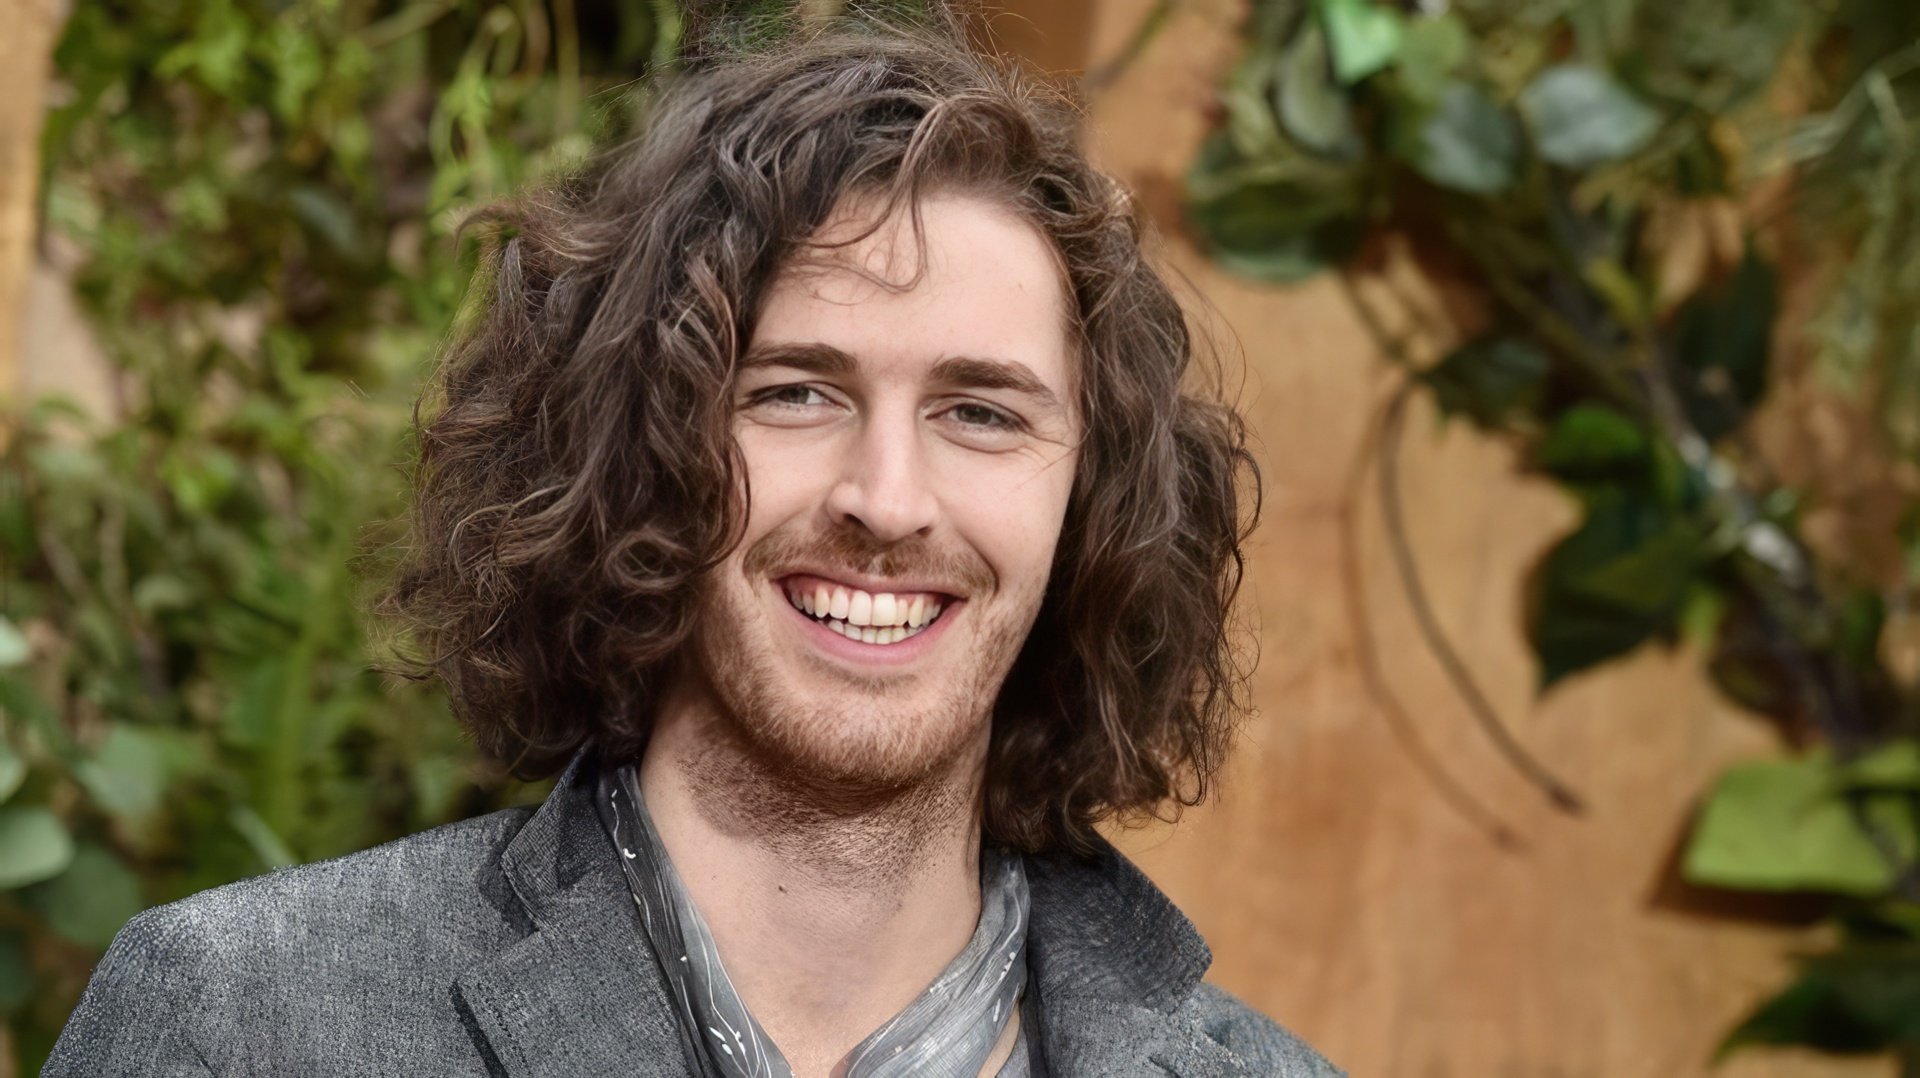 Hozier is a frequent guest of various television shows